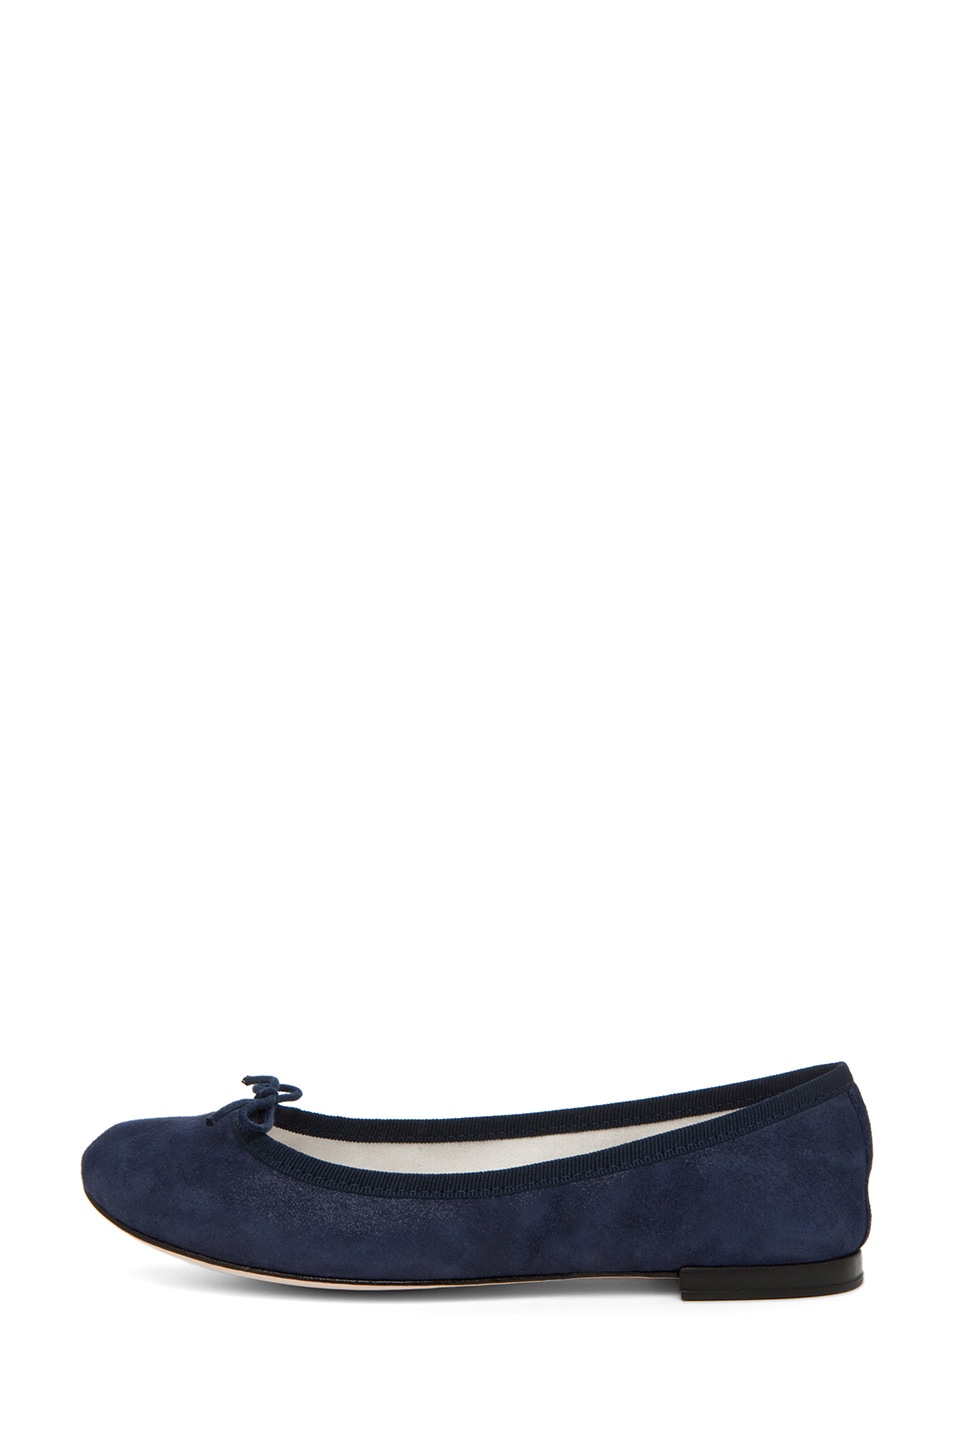 Image 1 of Repetto Suede Flat in Navy